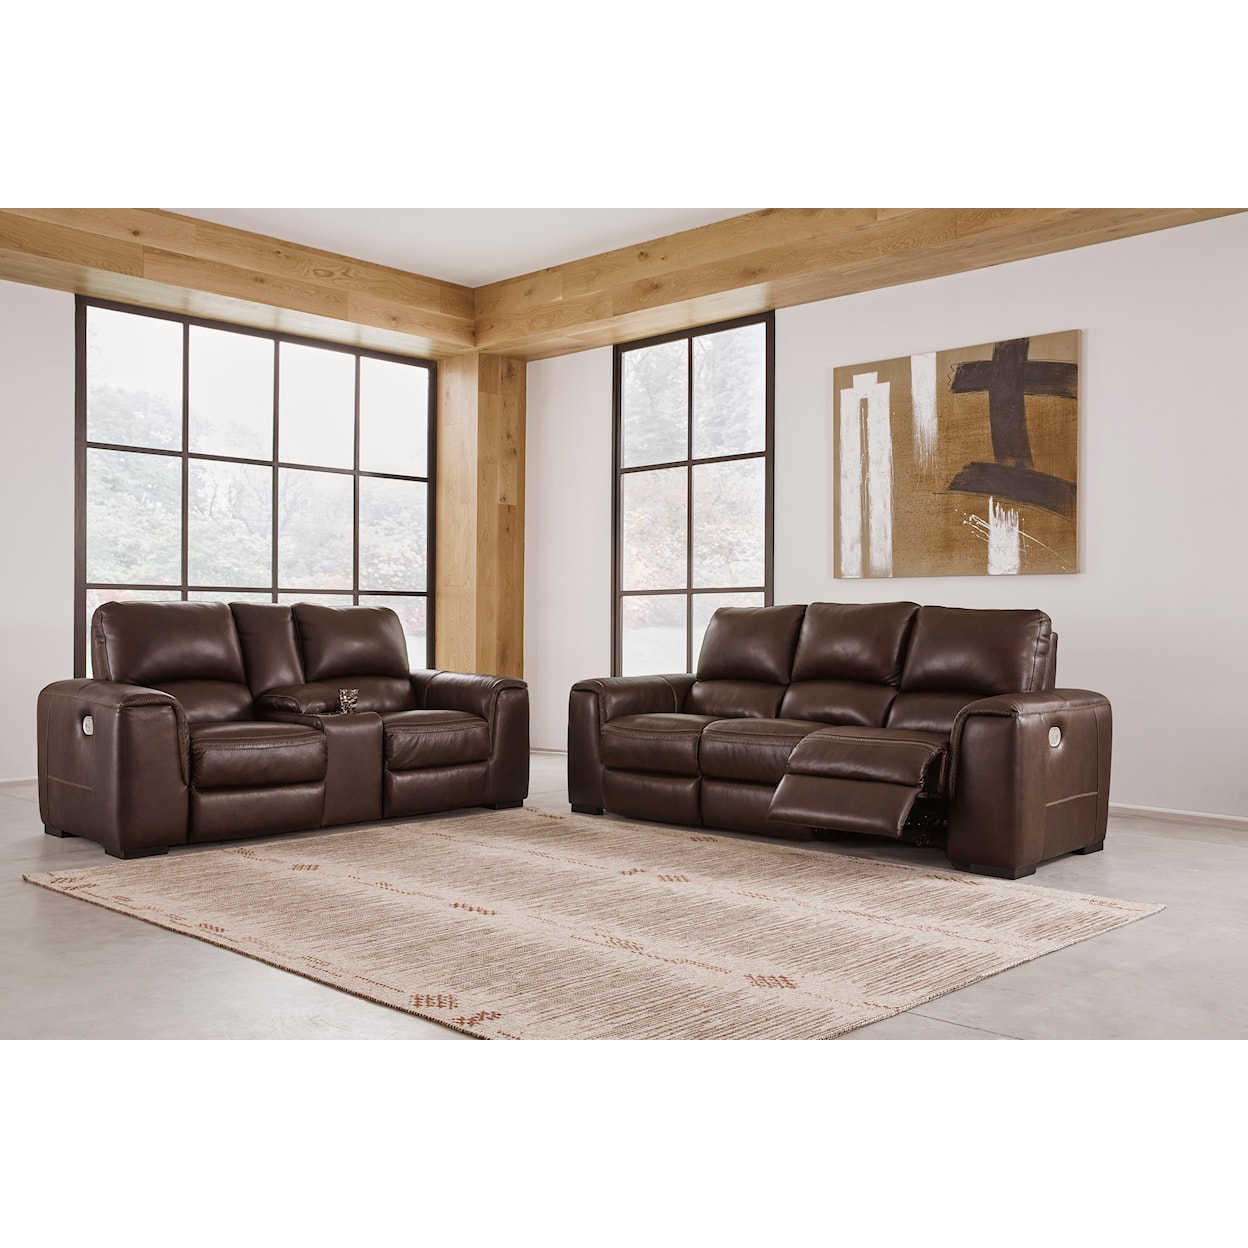 Signature Design by Ashley Furniture Alessandro Living Room Set